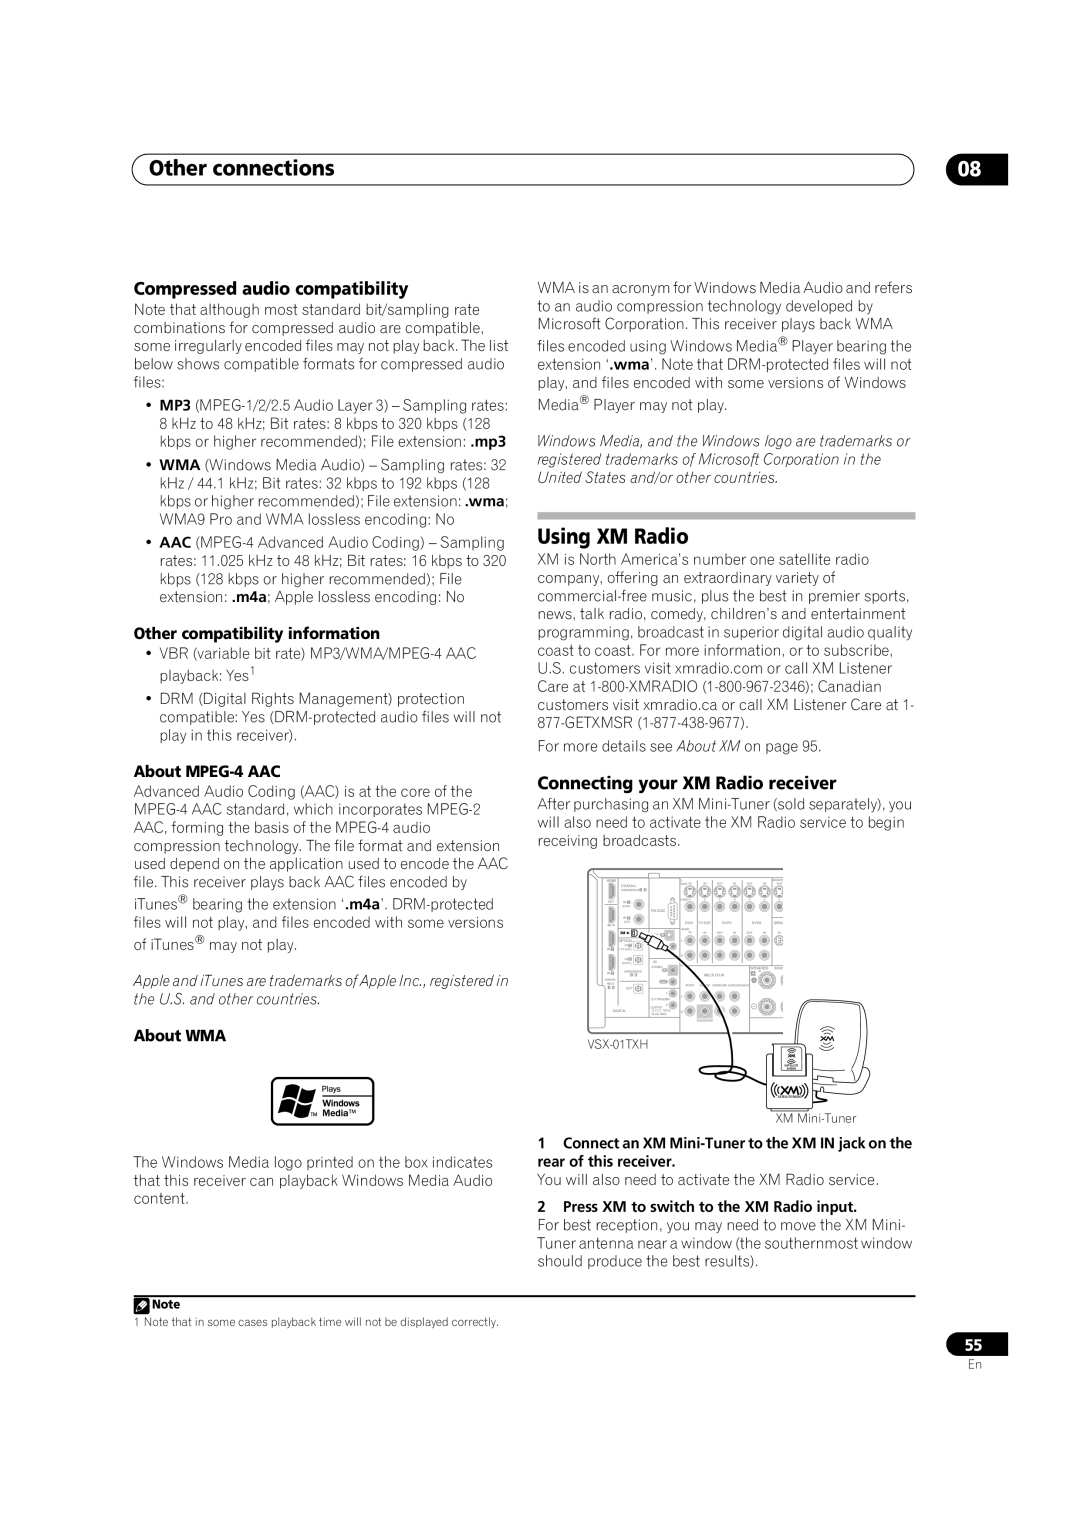 Pioneer VSX-01TXH manual Using XM Radio, Compressed audio compatibility, Connecting your XM Radio receiver, About MPEG-4AAC 